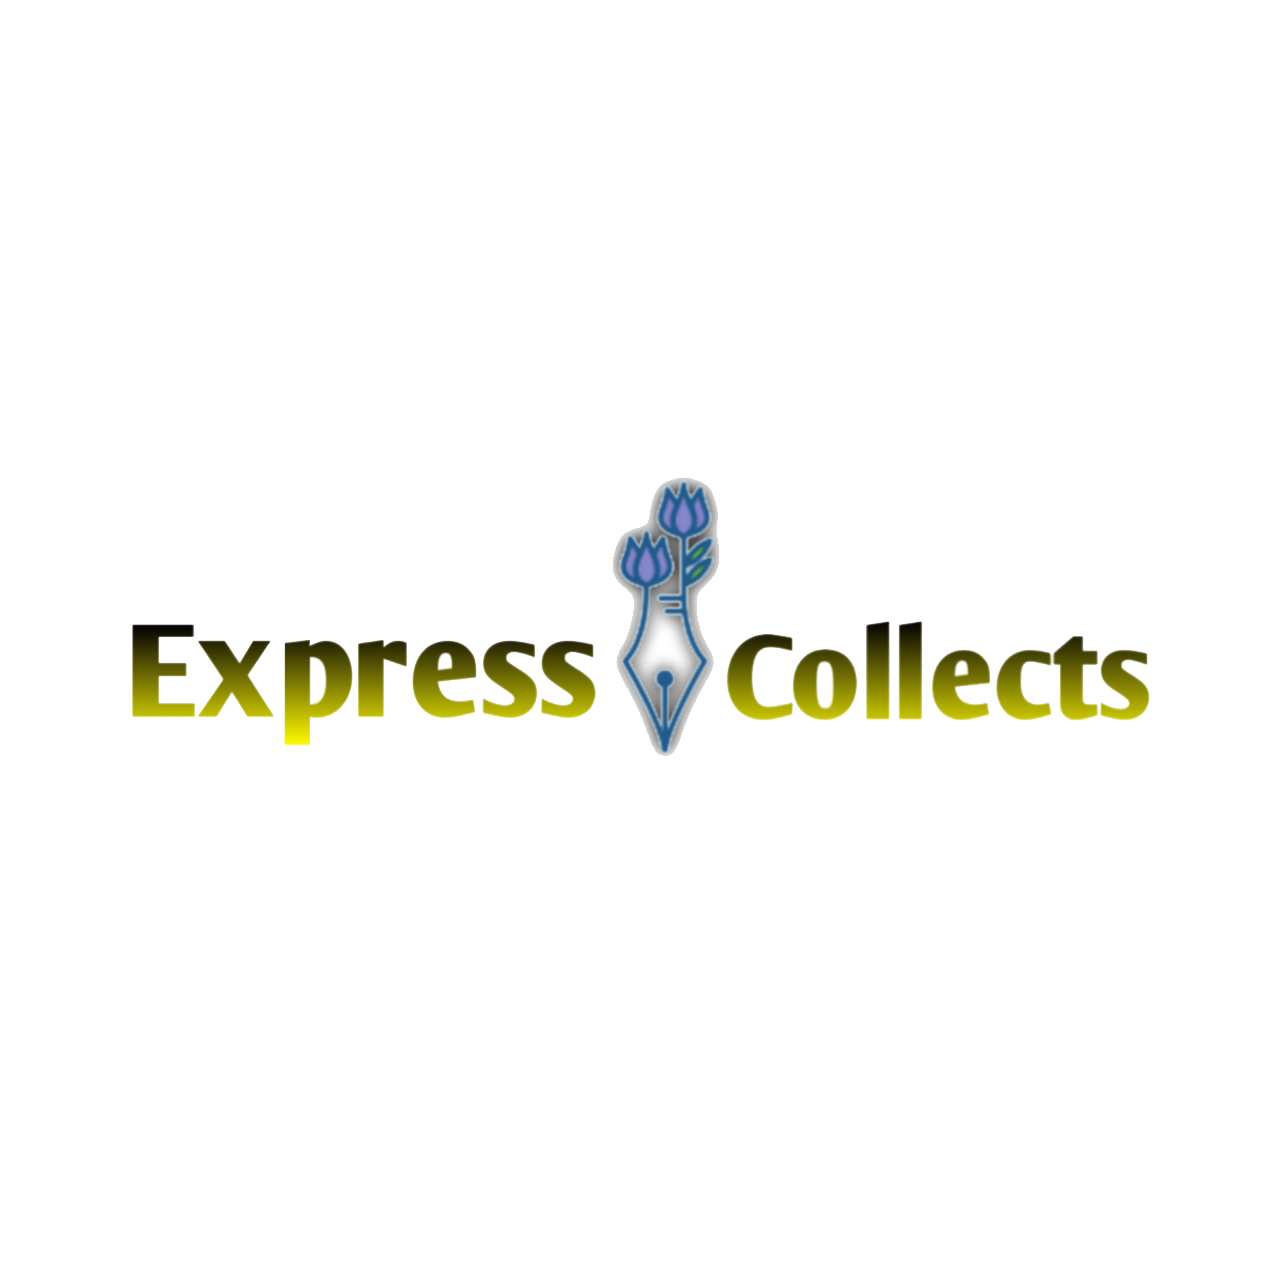 Express Collects